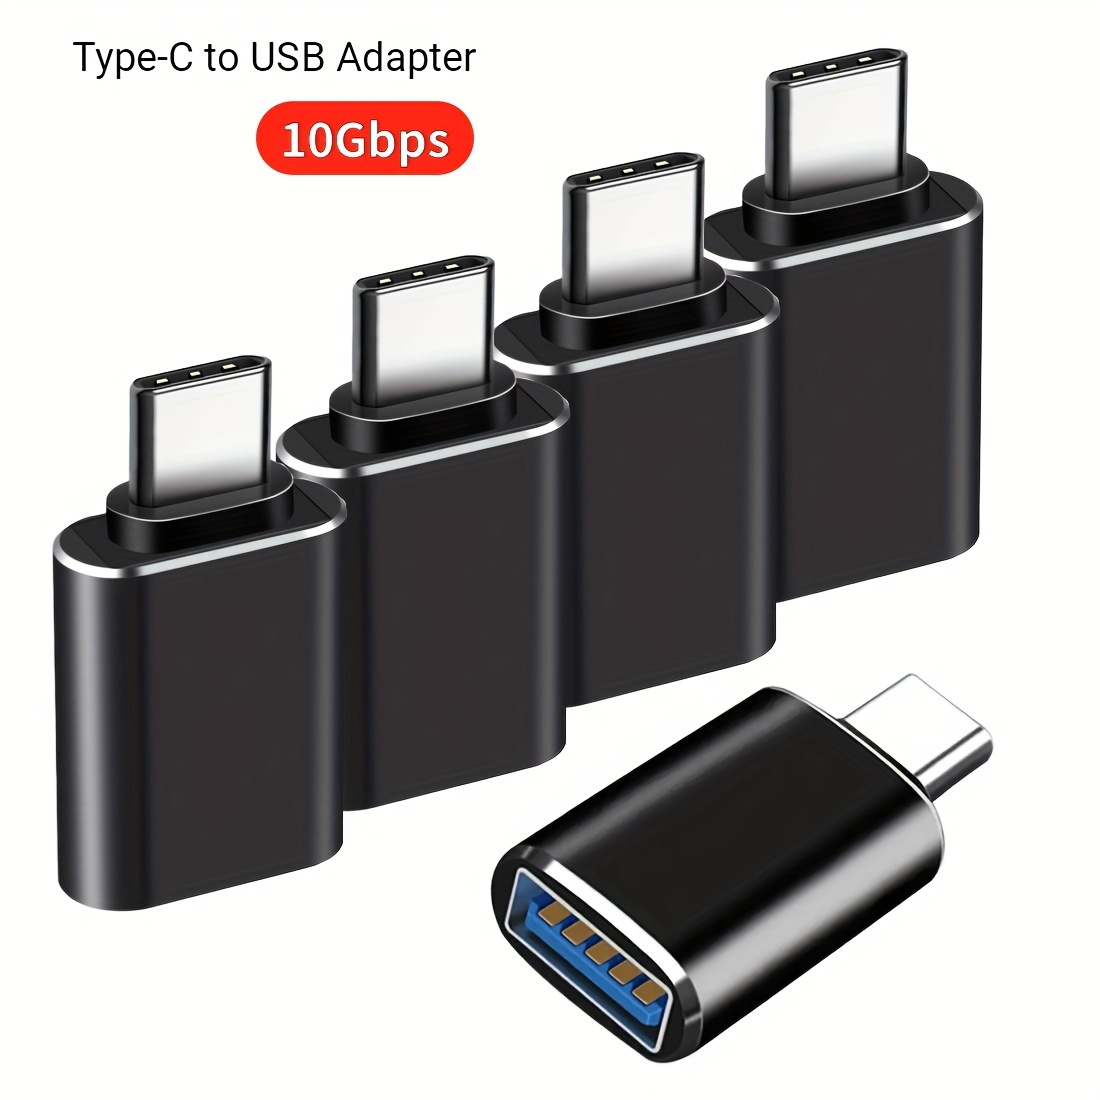 USB C Adapters 4 Pack, USB C to USB 3.0 OTG Adapter, Micro USB to USB C  Adapter Compatible with MacBook Pro, Samsung Galaxy, Smartphones, Laptop,  PC